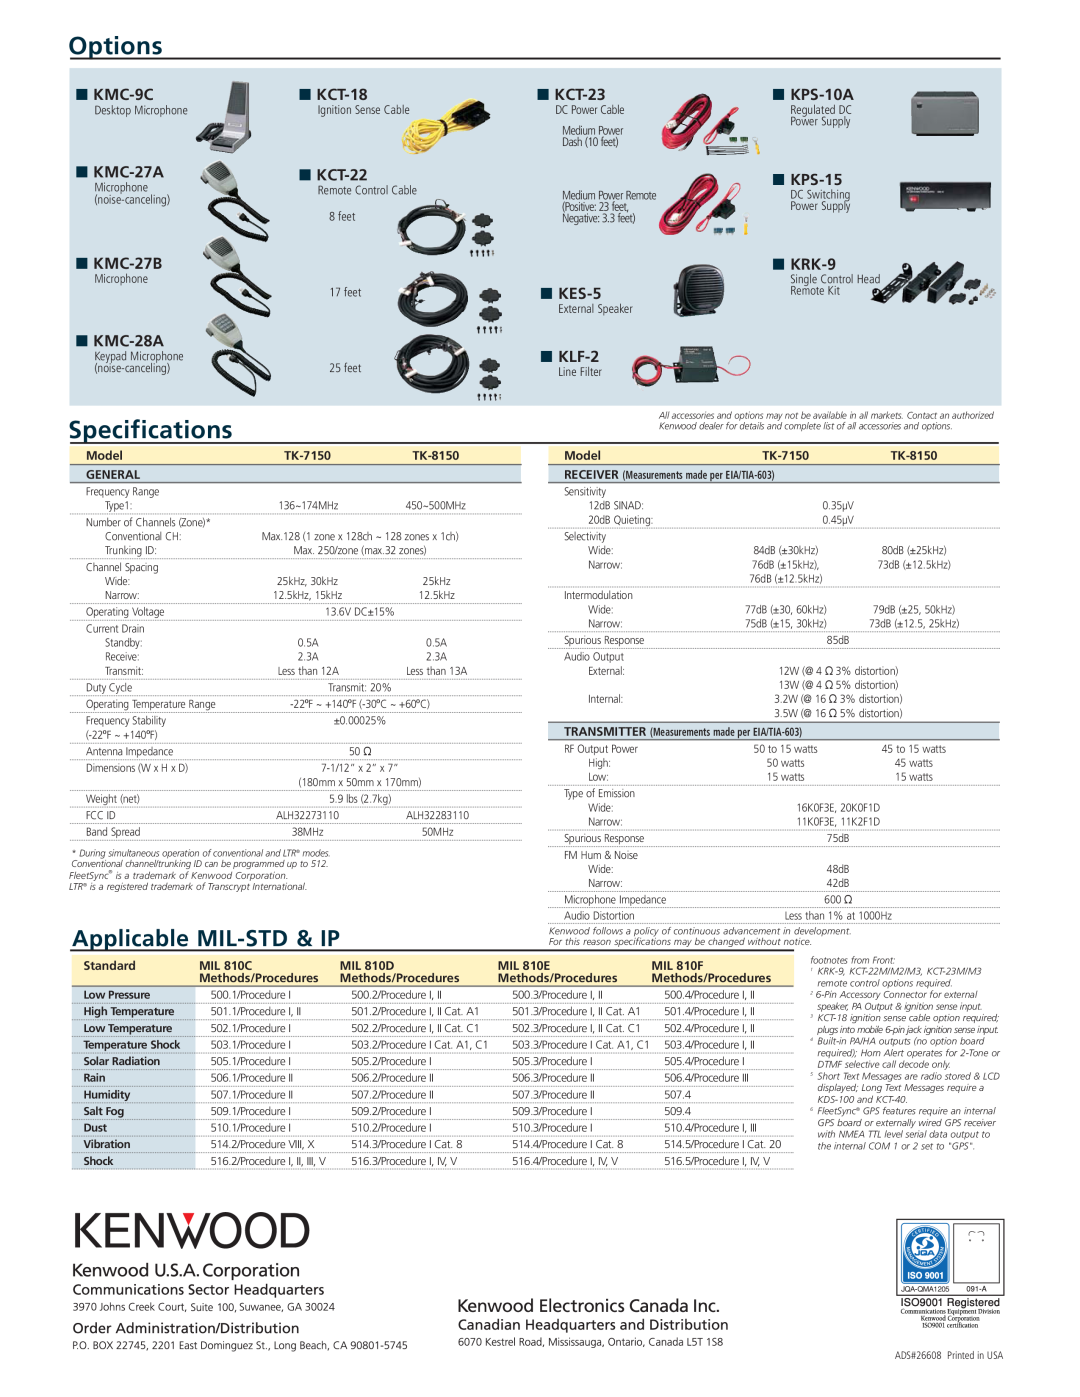 Kenwood TK-8150 Options, Specifications, Applicable MIL-STD & IP, KMC-9C, KCT-18, KMC-27A, KCT-22, KMC-27B, KMC-28A, KES-5 